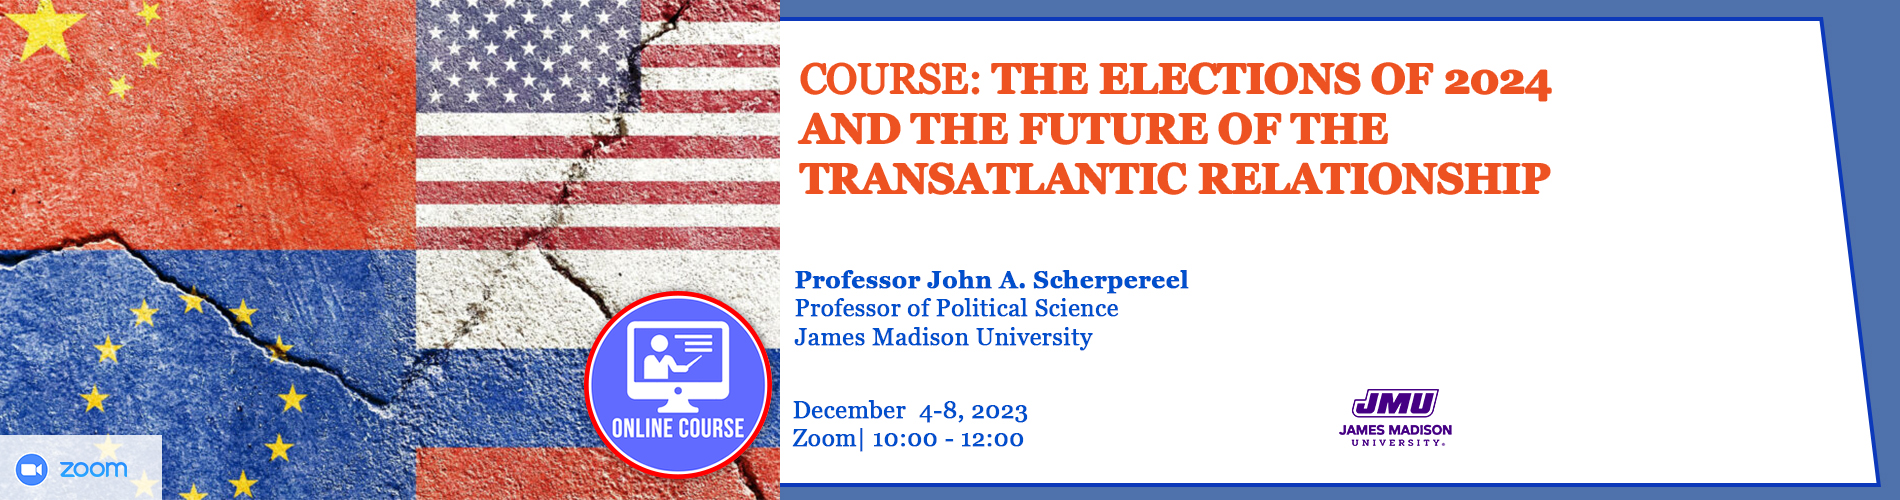 20231204-20231208_-_The_elections_of_2024_and_the_future_of_the_transatlantic_relationship